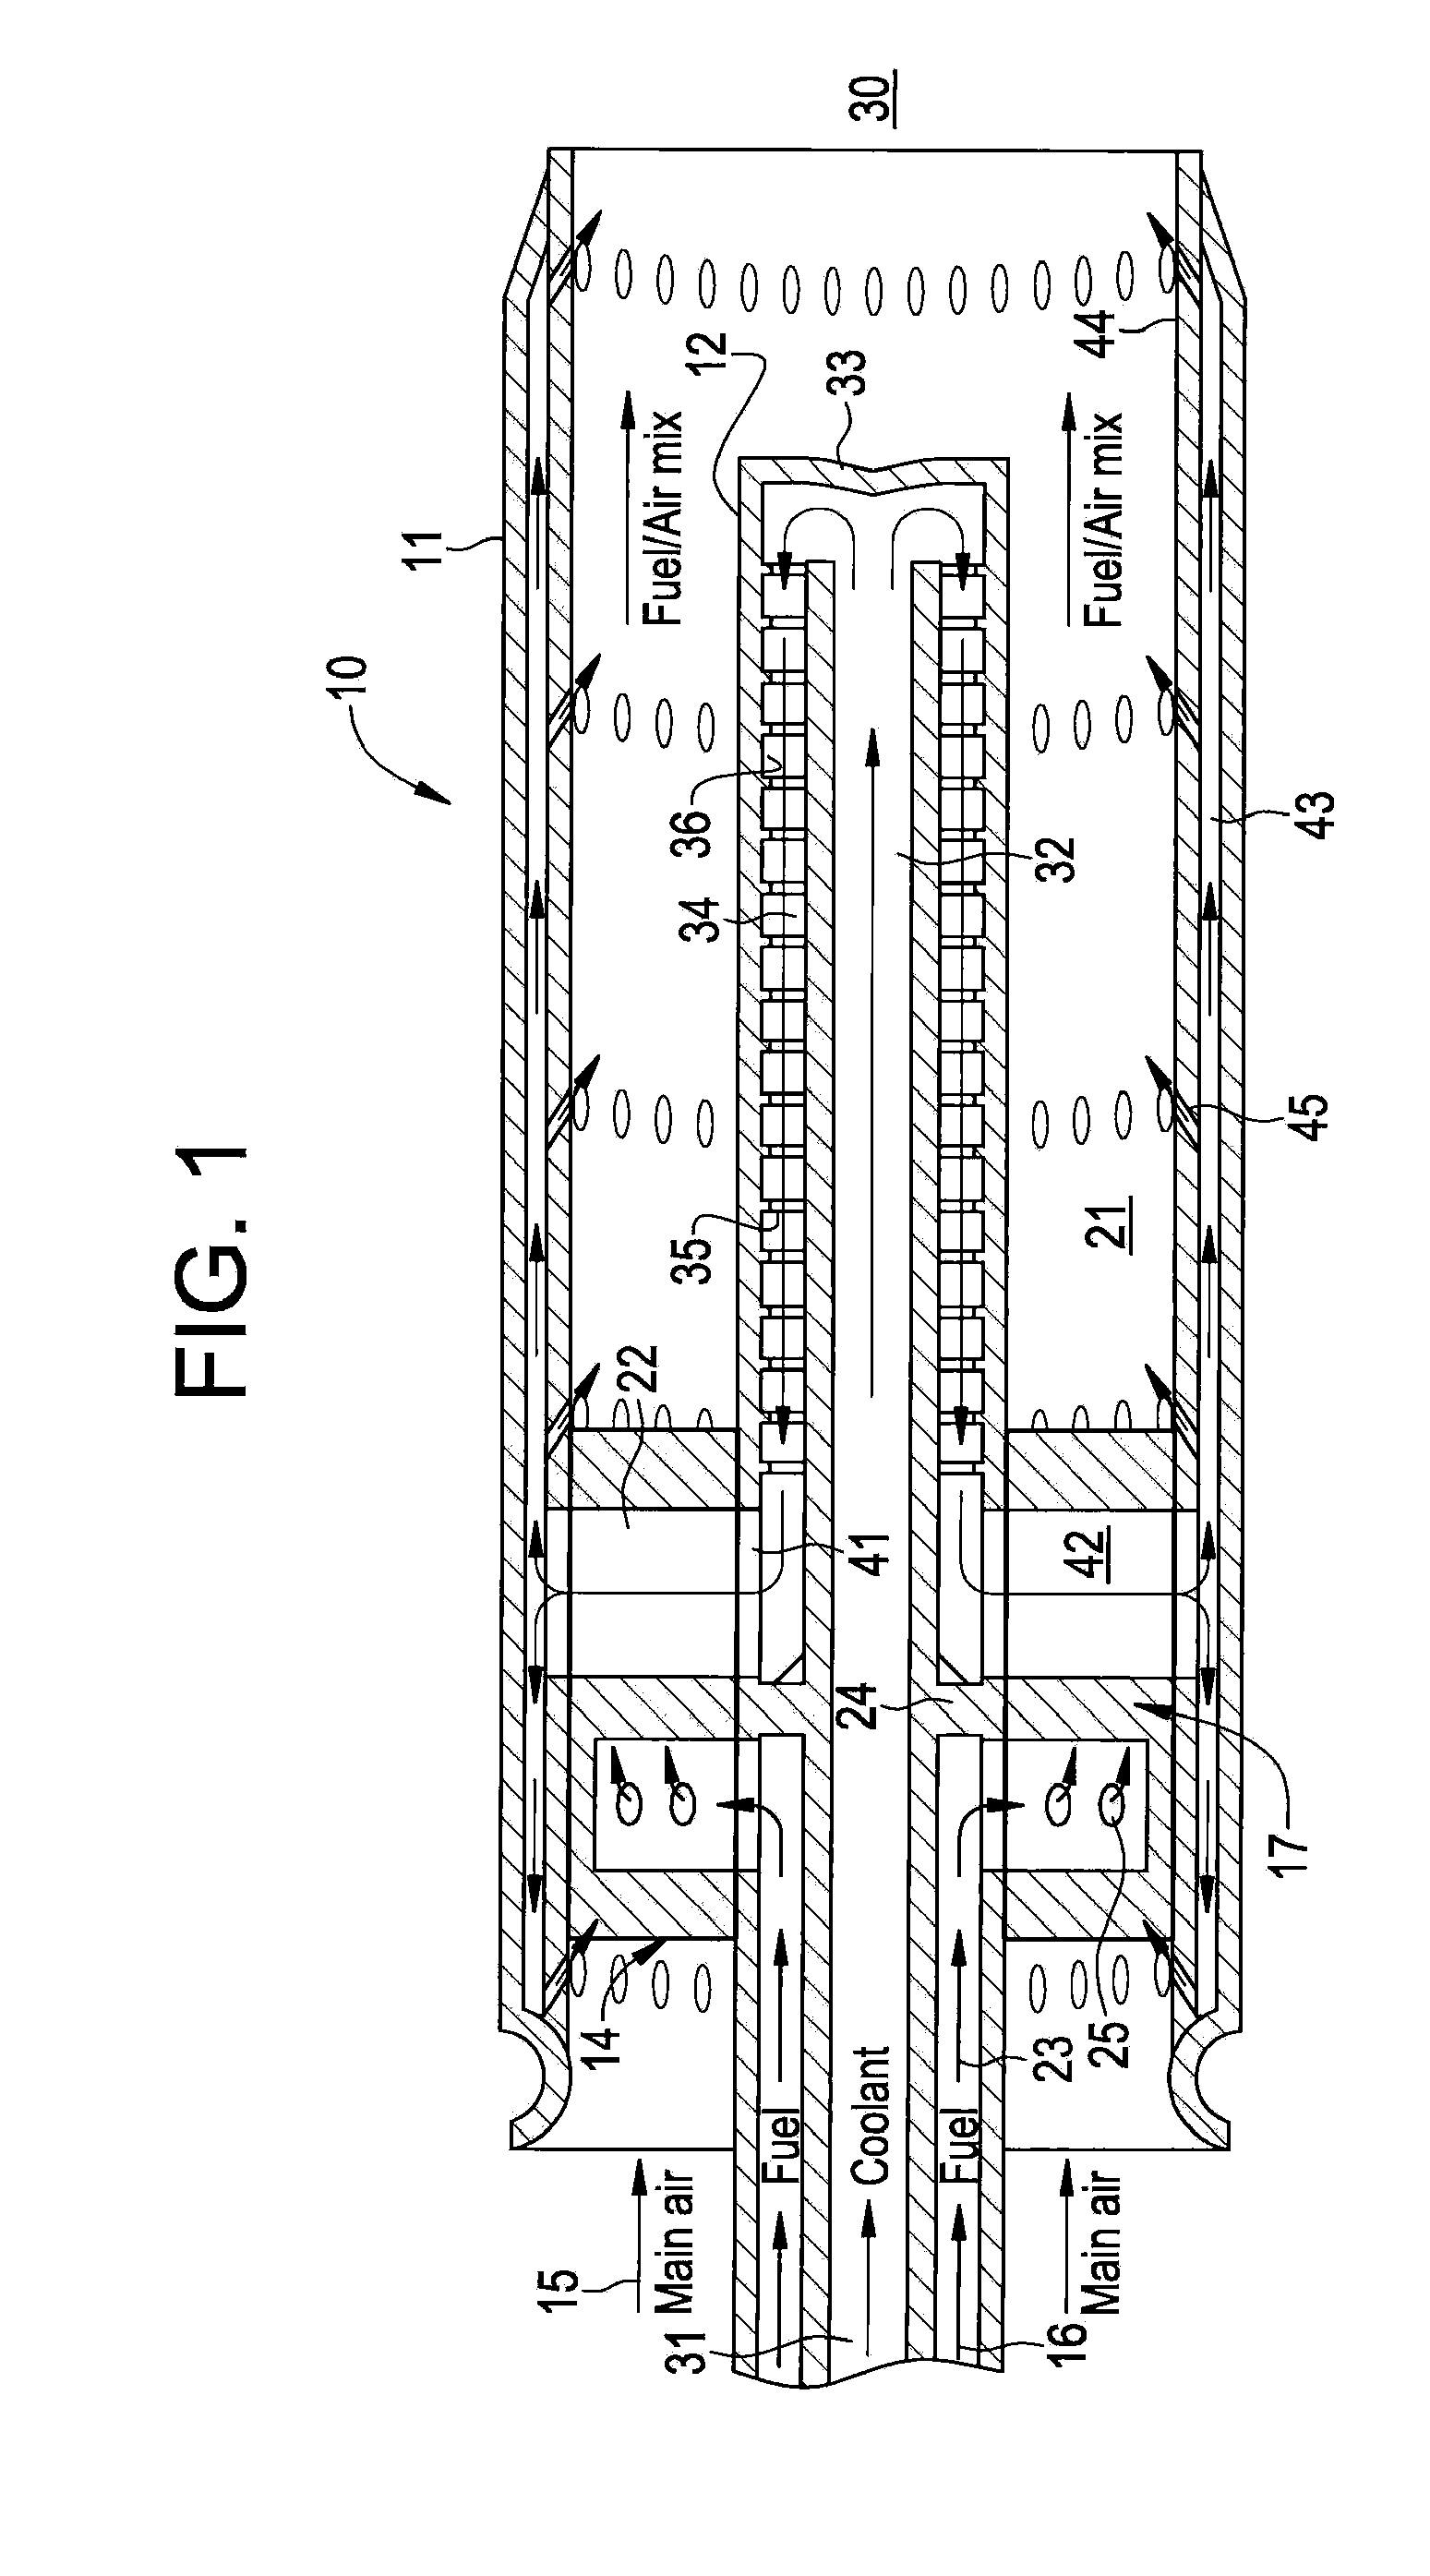 Flame Holding Tolerant Fuel and Air Premixer for a Gas Turbine Combustor